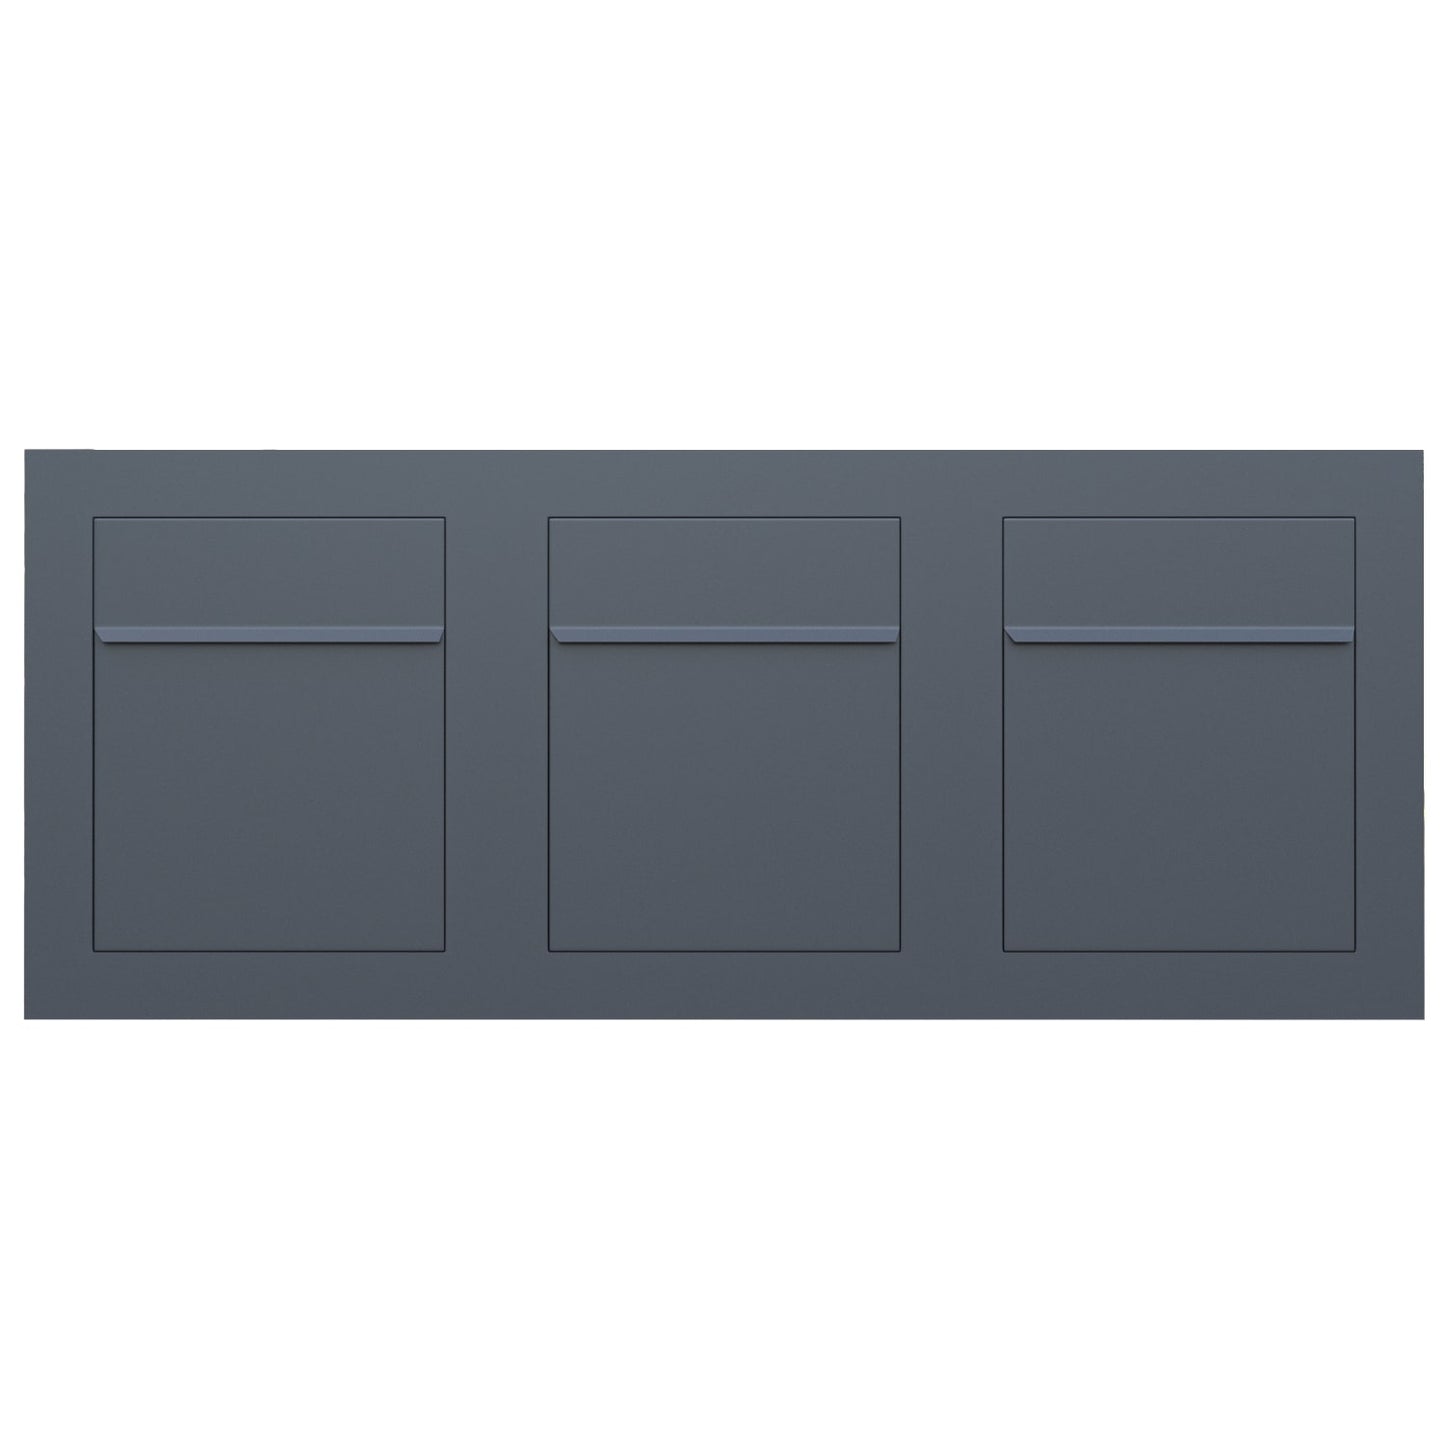 BARI 3 - Contemporary built-in mailbox in high durability anthracite